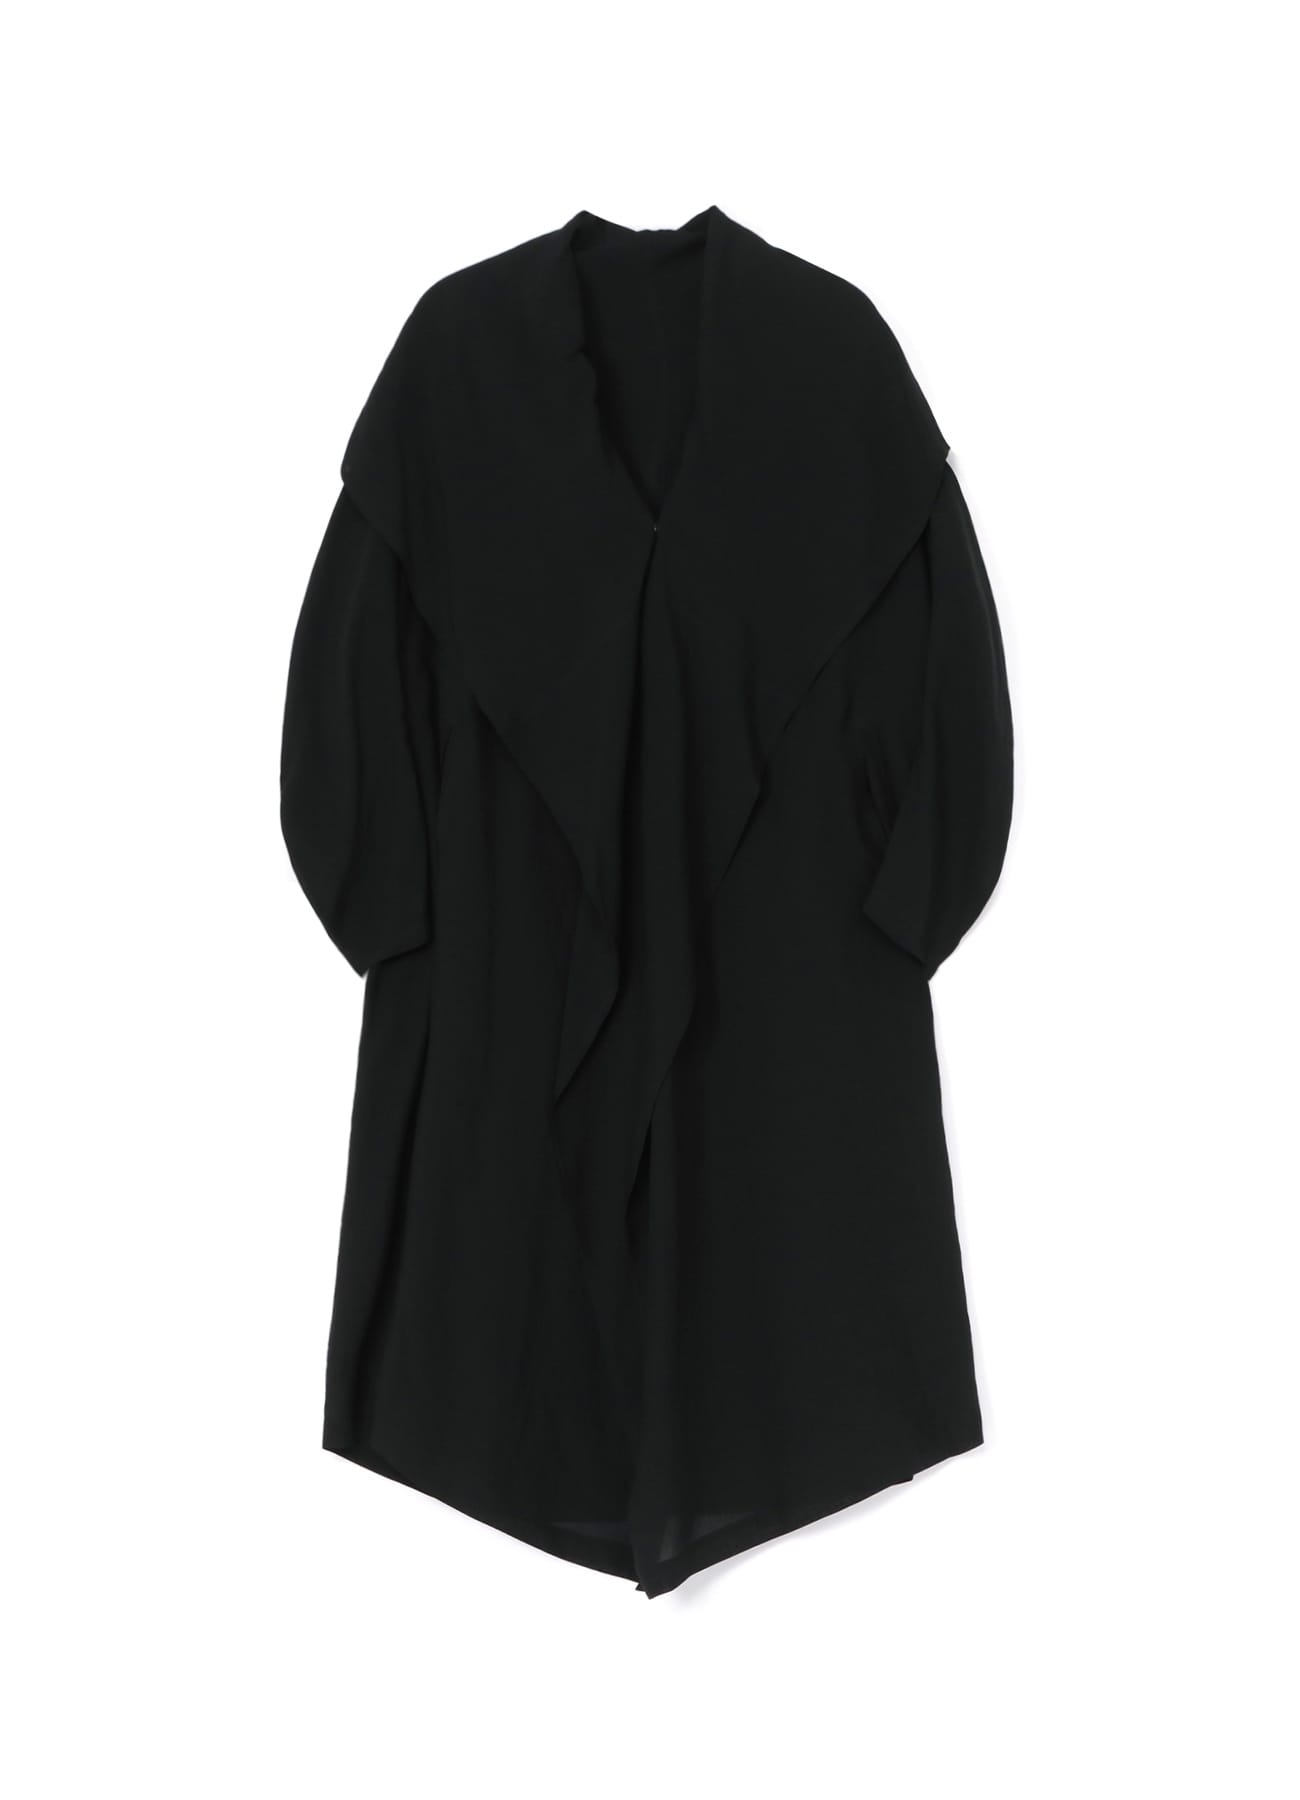 New Arrival | [Official] THE SHOP YOHJI YAMAMOTO (2/16 page)